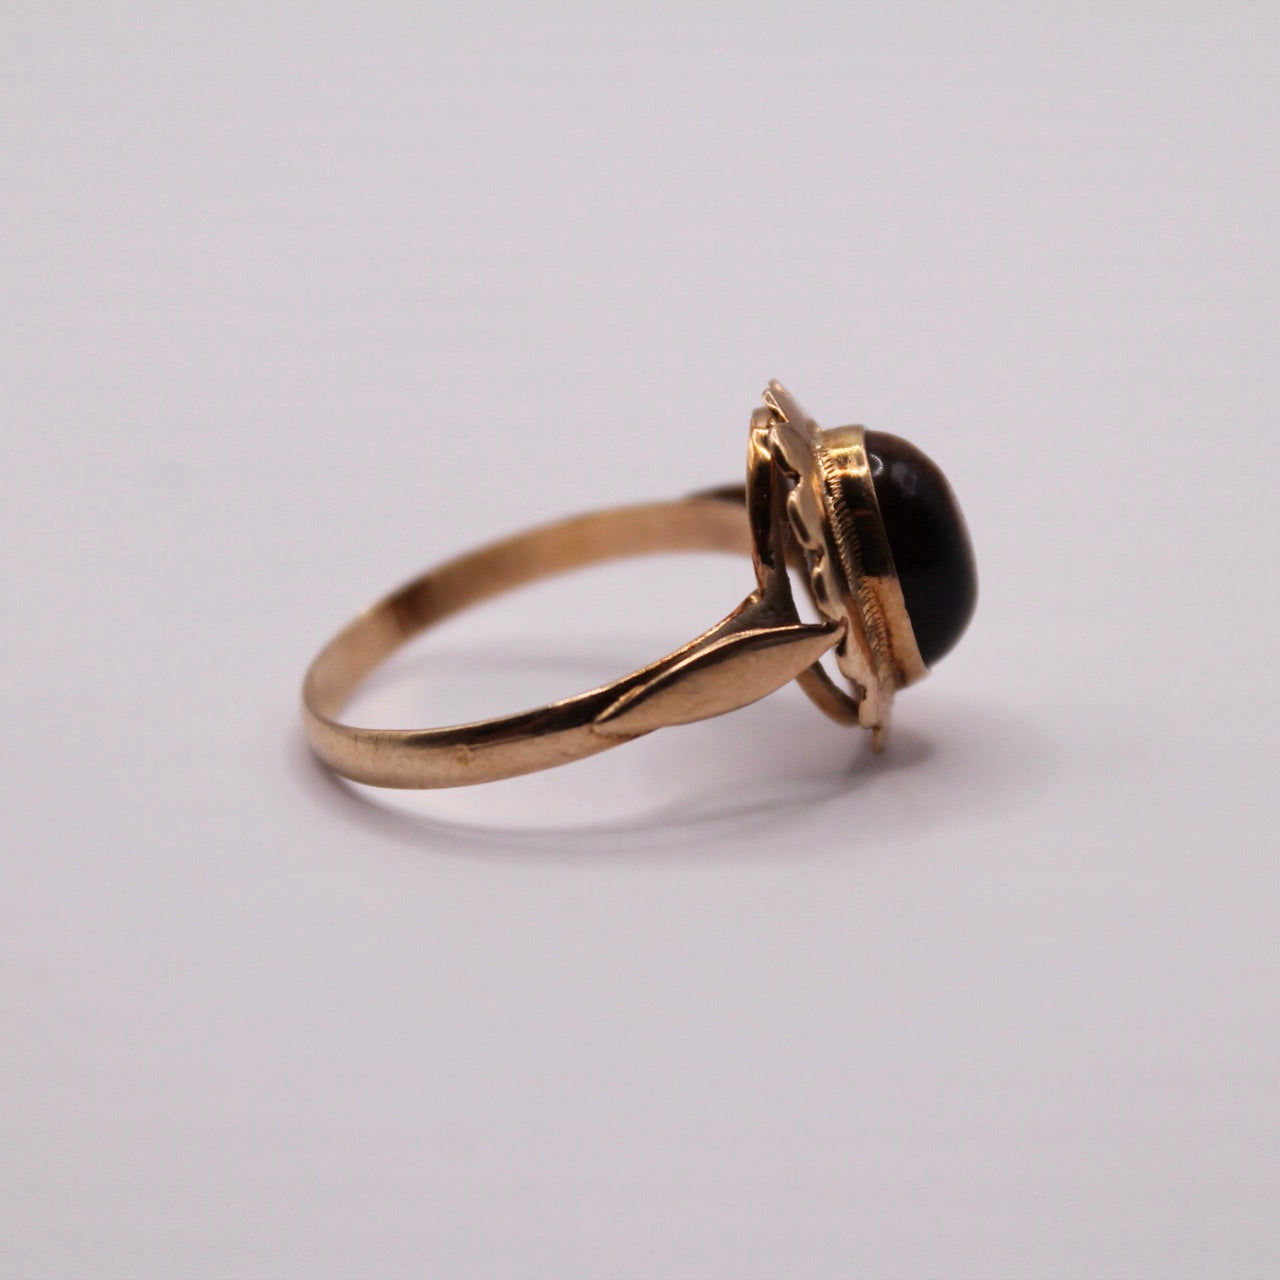 Tiger's Eye Solitaire Ring